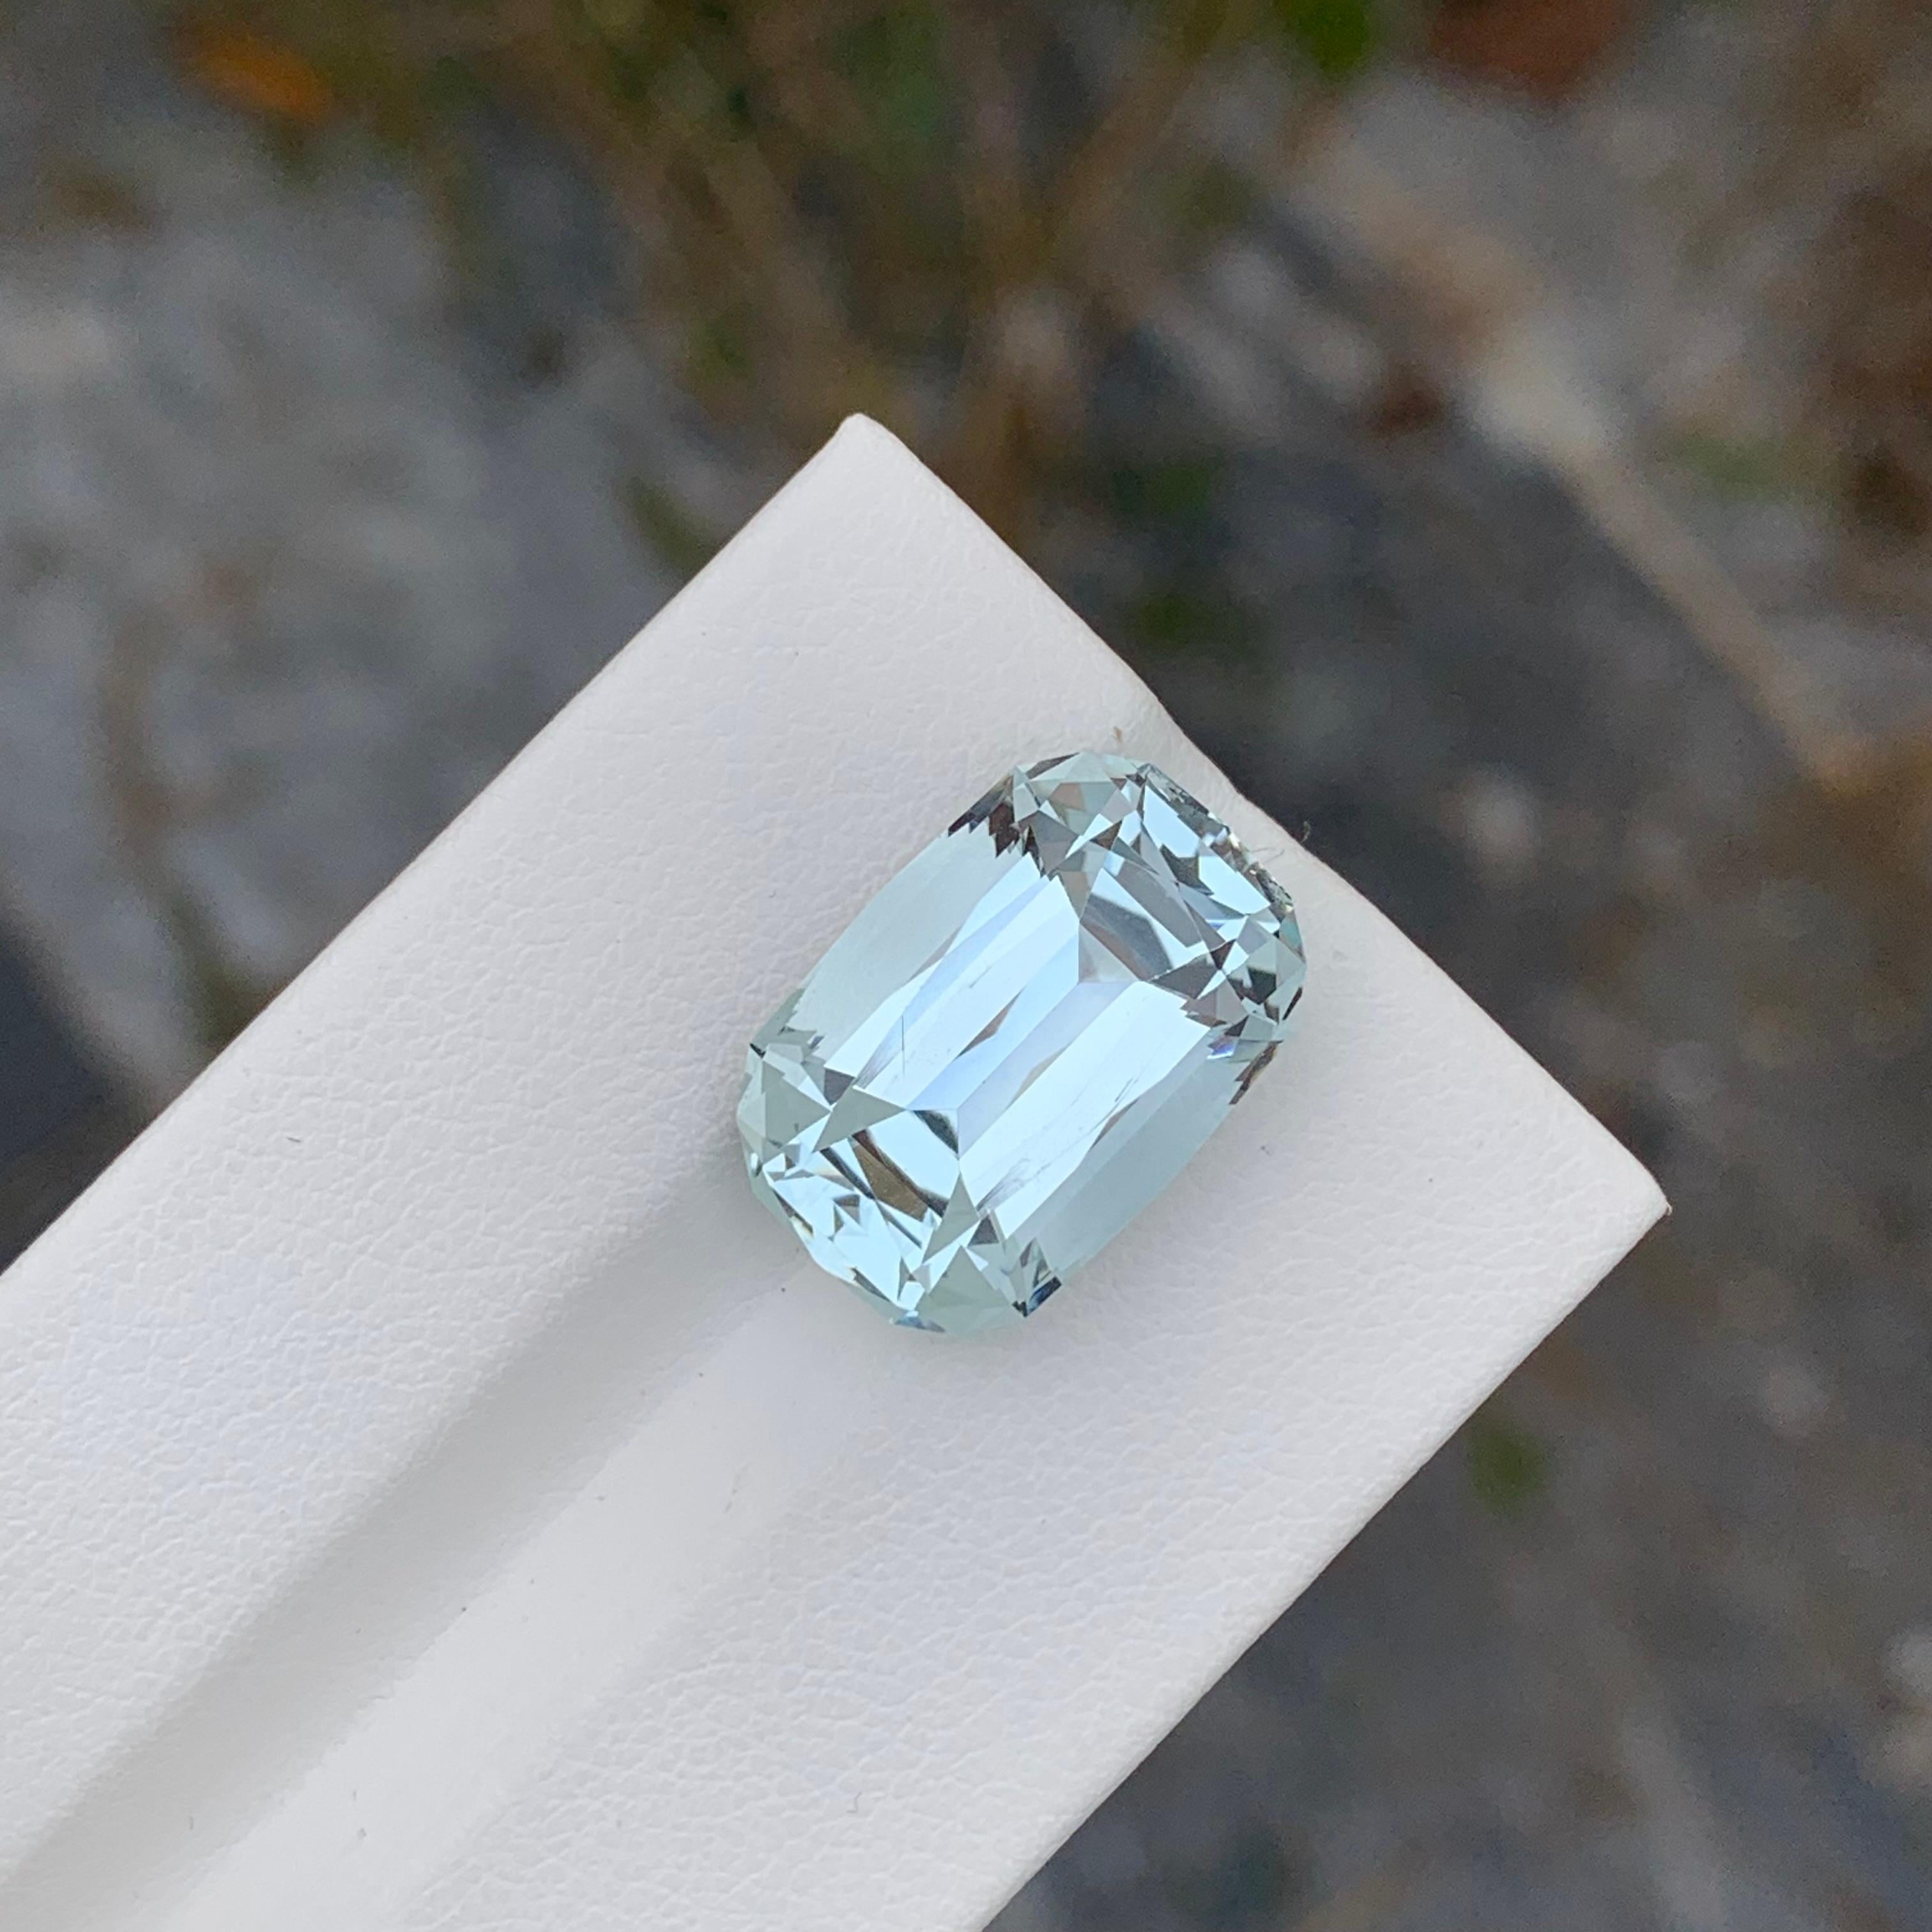 Loose Aquamarine
Weight: 12.10 Carat
Dimension: 17.3 x 11.9 x 9 Mm
Colour : Blue and white
Origin: Shigar Valley, Pakistan
Treatment: Non
Certificate : On Demand
Shape: Cushion 

Aquamarine is a captivating gemstone known for its enchanting